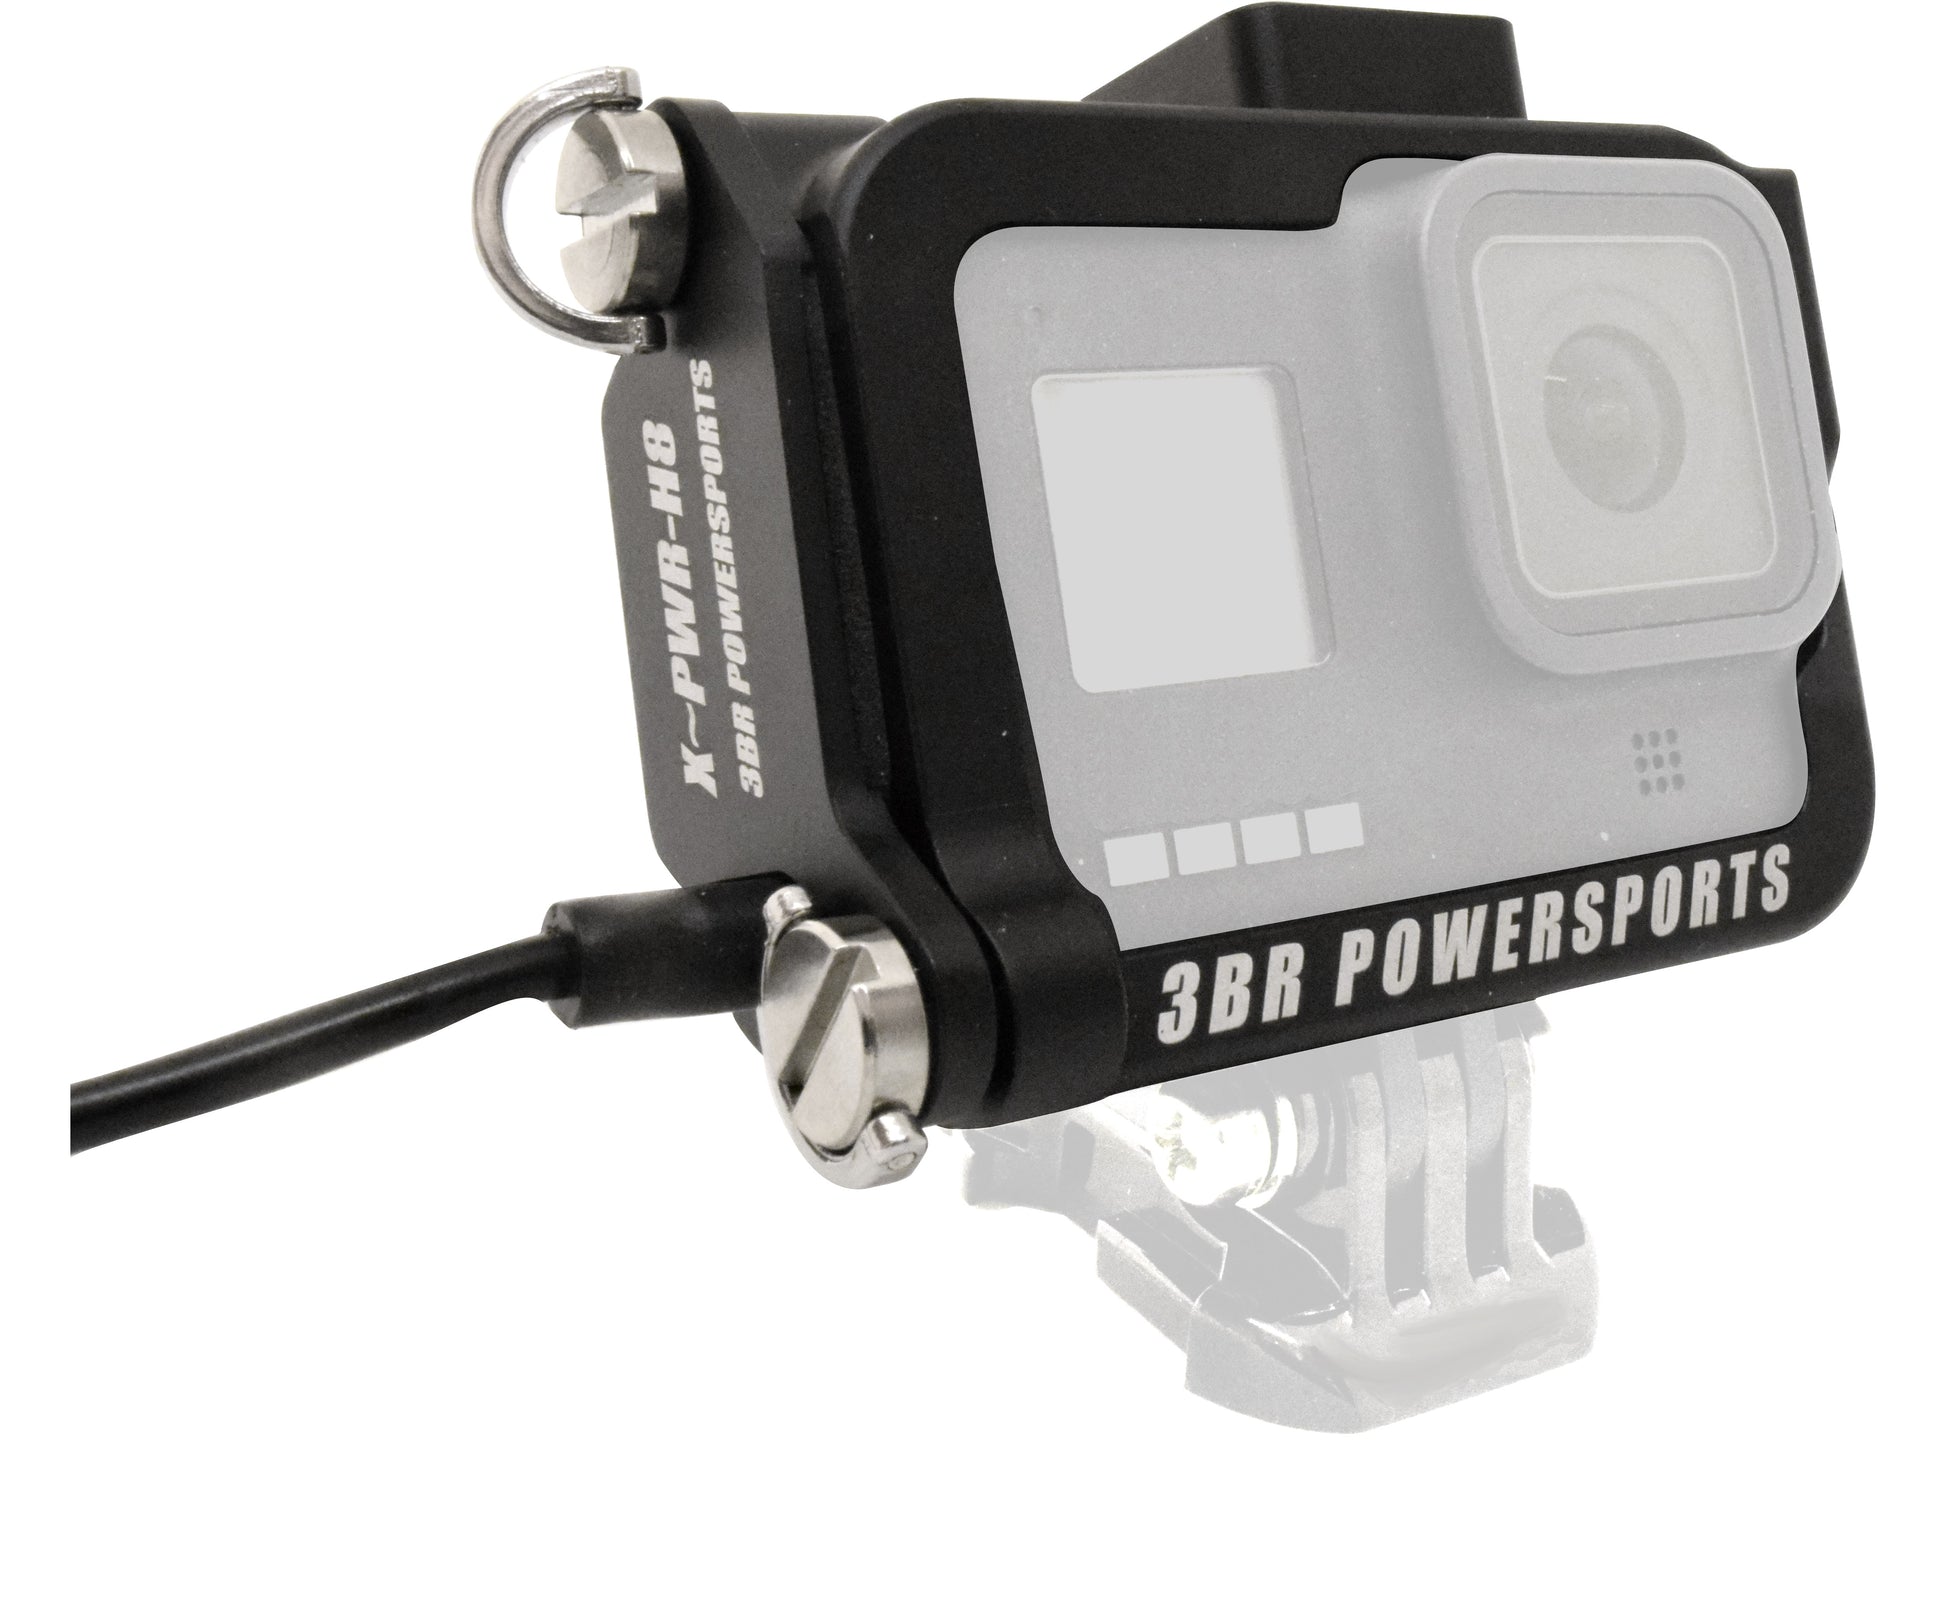 X~PWR H8 All-weather External Power Kit for GoPro HERO8 – 3BR Powersports